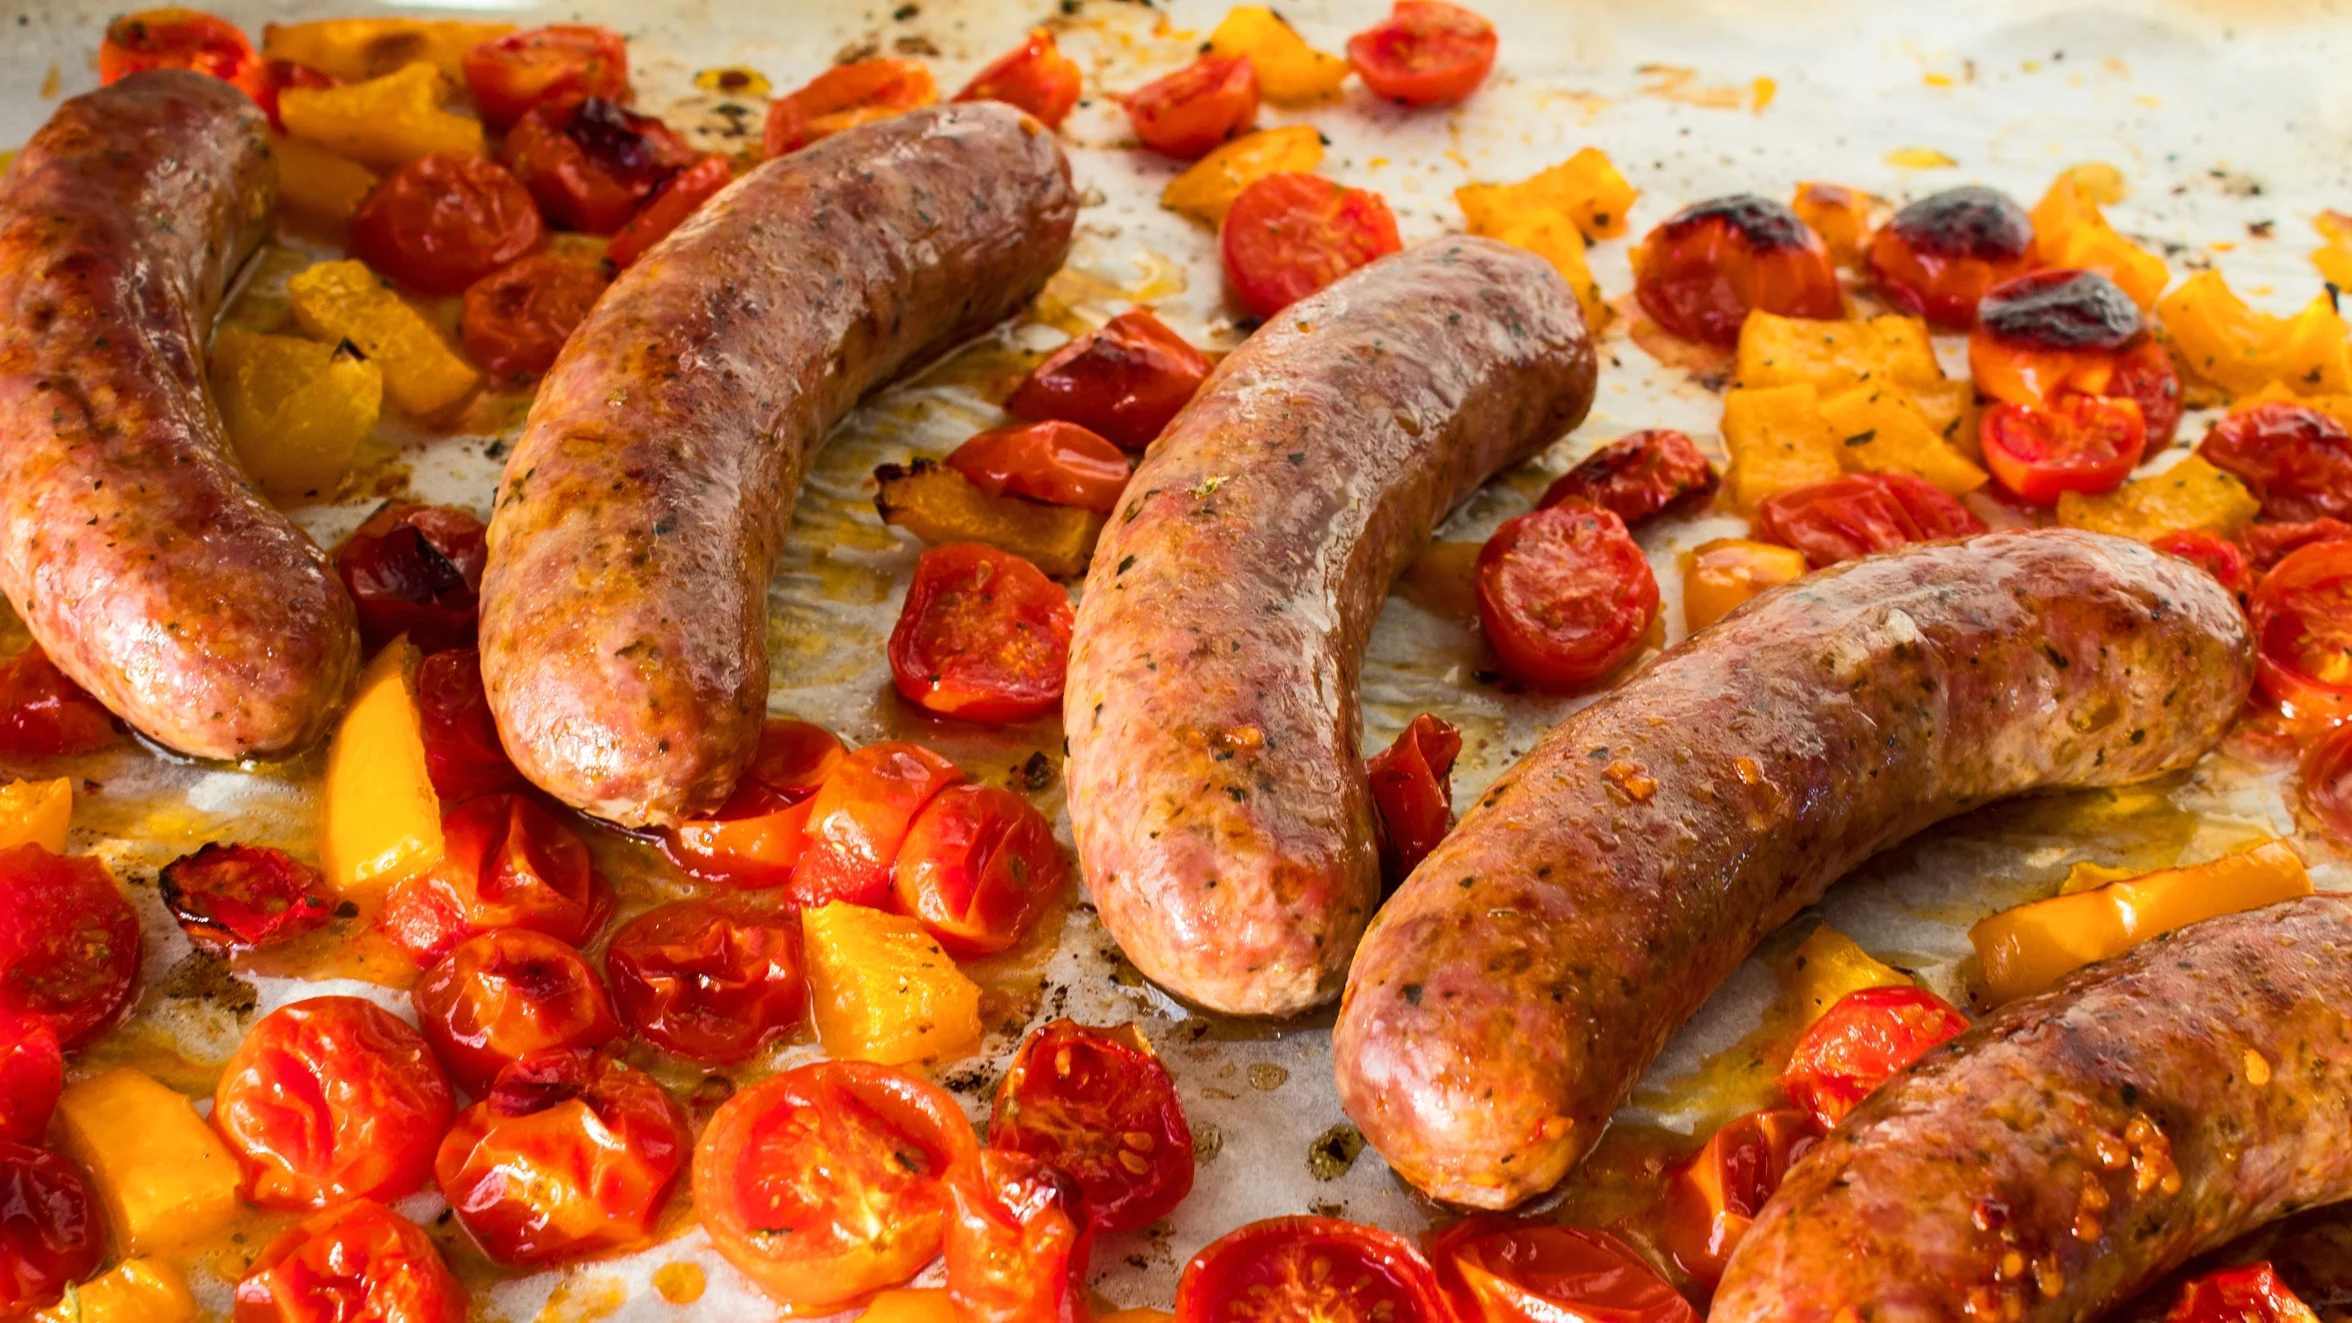 How Long to Cook Sausage in Oven